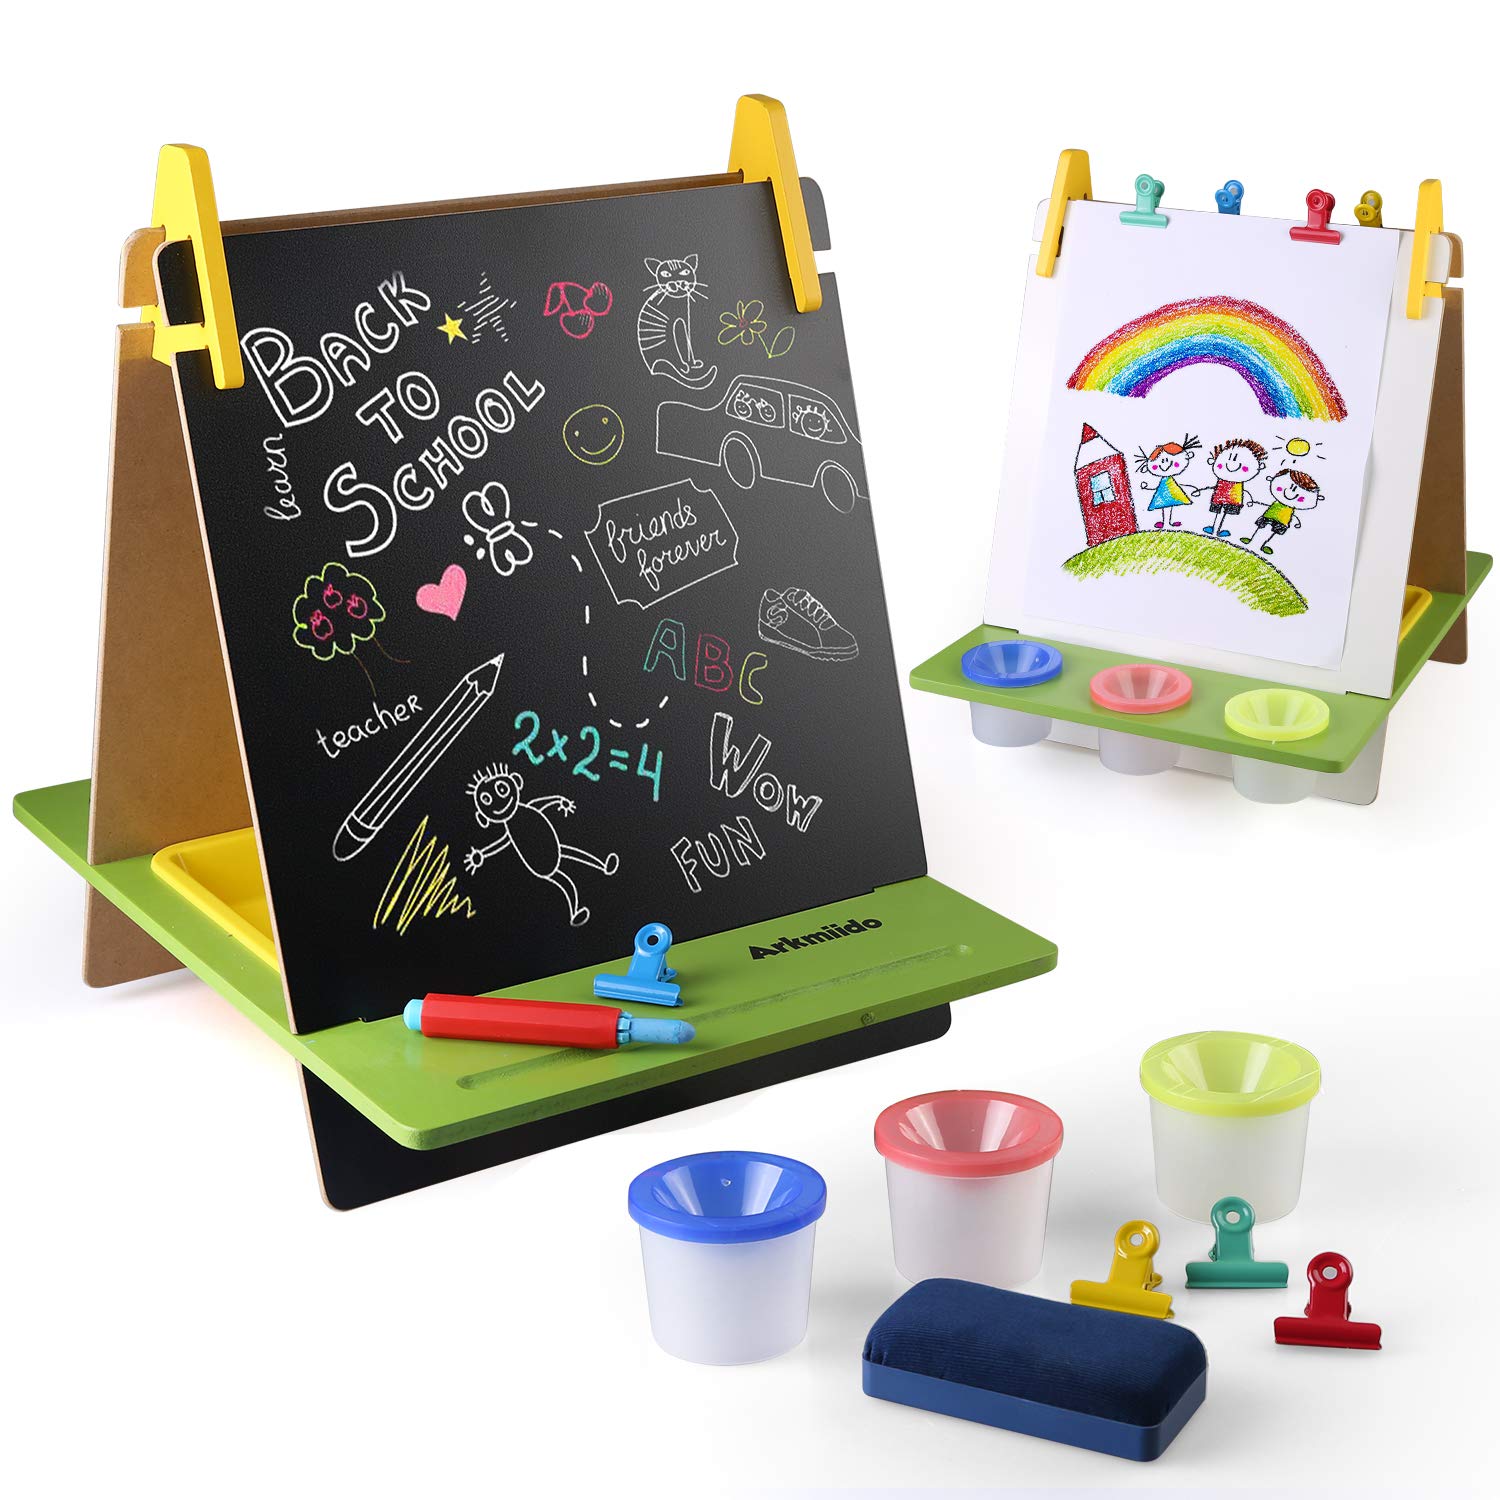 Arkmiido Wooden Tabletop Art Easel for Kids with Drawing Paper,Double-Sided Whiteboard & Chalkboard Toddler Easel with Paper Clip & Accessories,Child Easel Gift for Kids,Toddlers,Boys and Girls. Featured Image